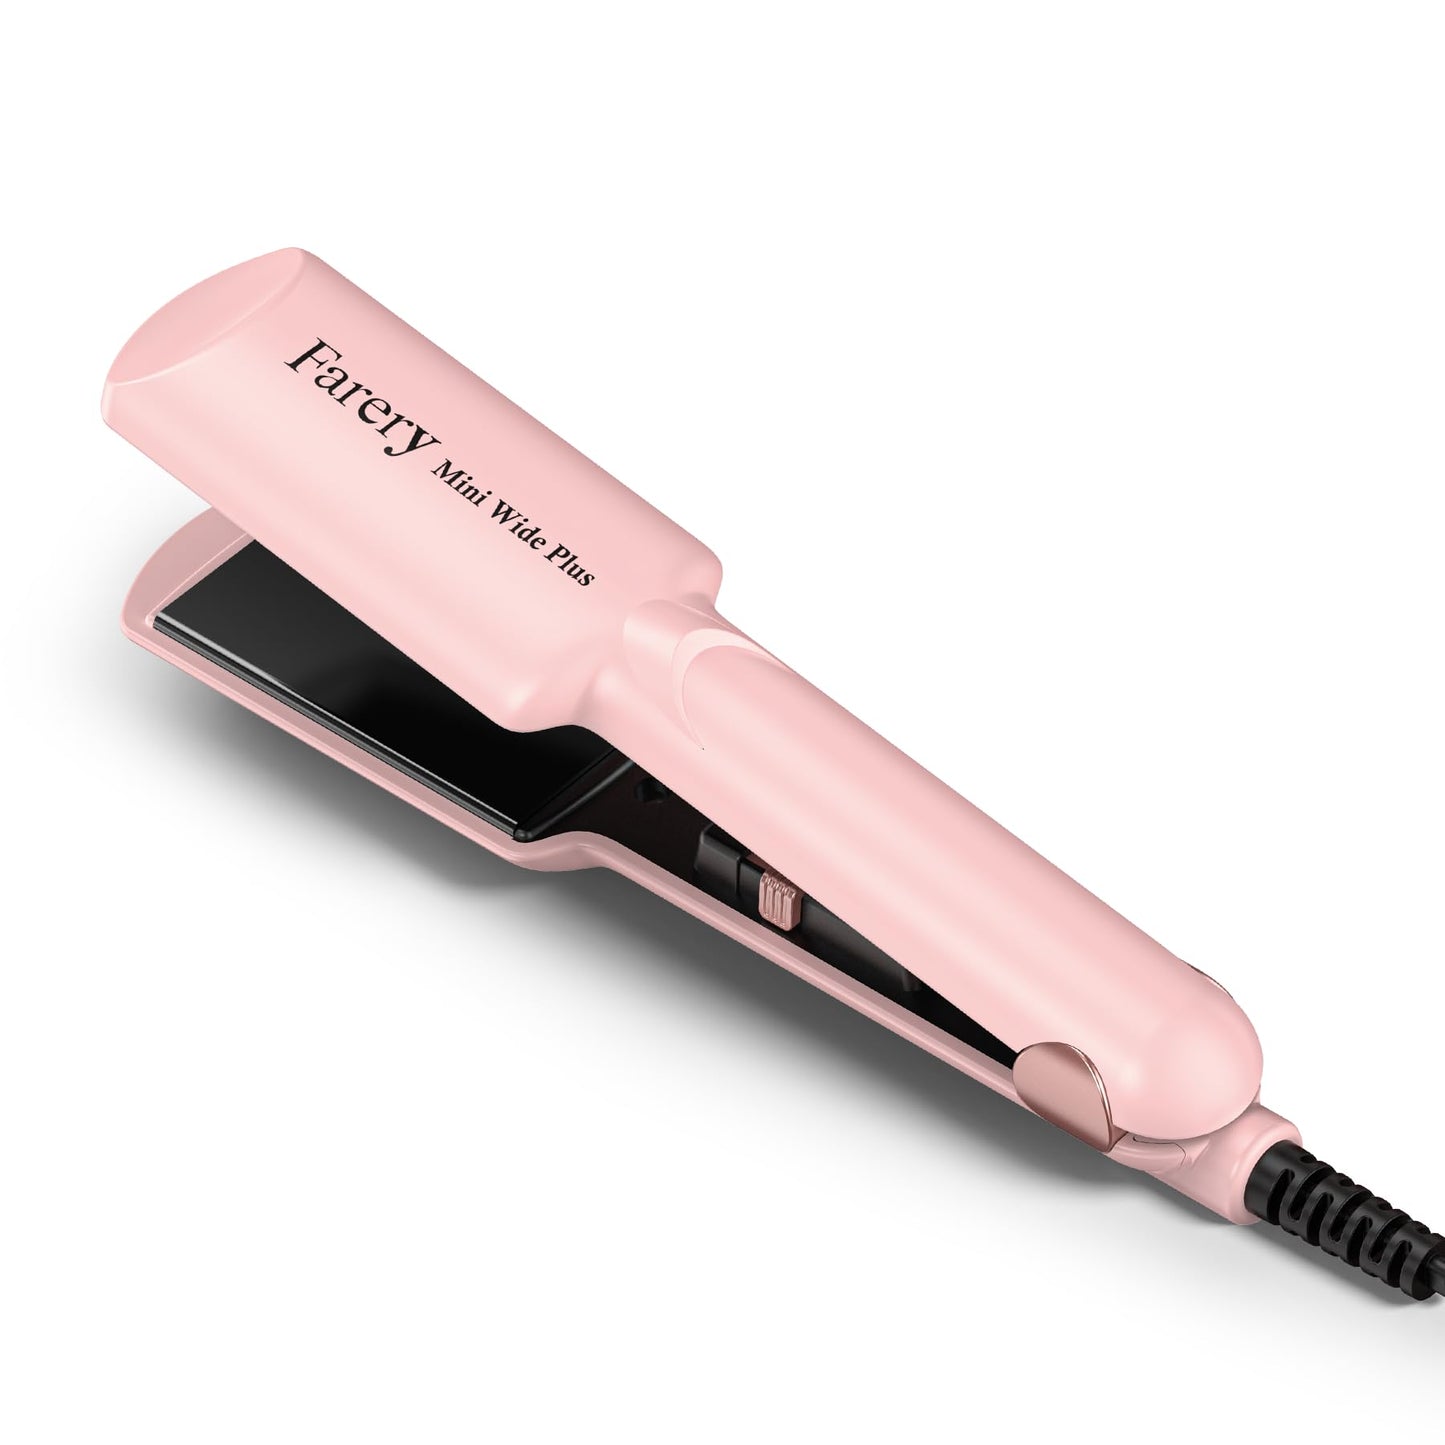 FARERY Mini Flat Iron Travel Size, 1.5 Inch Ceramic Mini Hair Straightener, Small Flat Iron for Short to Medium Hair, Portable Hair Straightener with Dual Voltage and Storage Bag